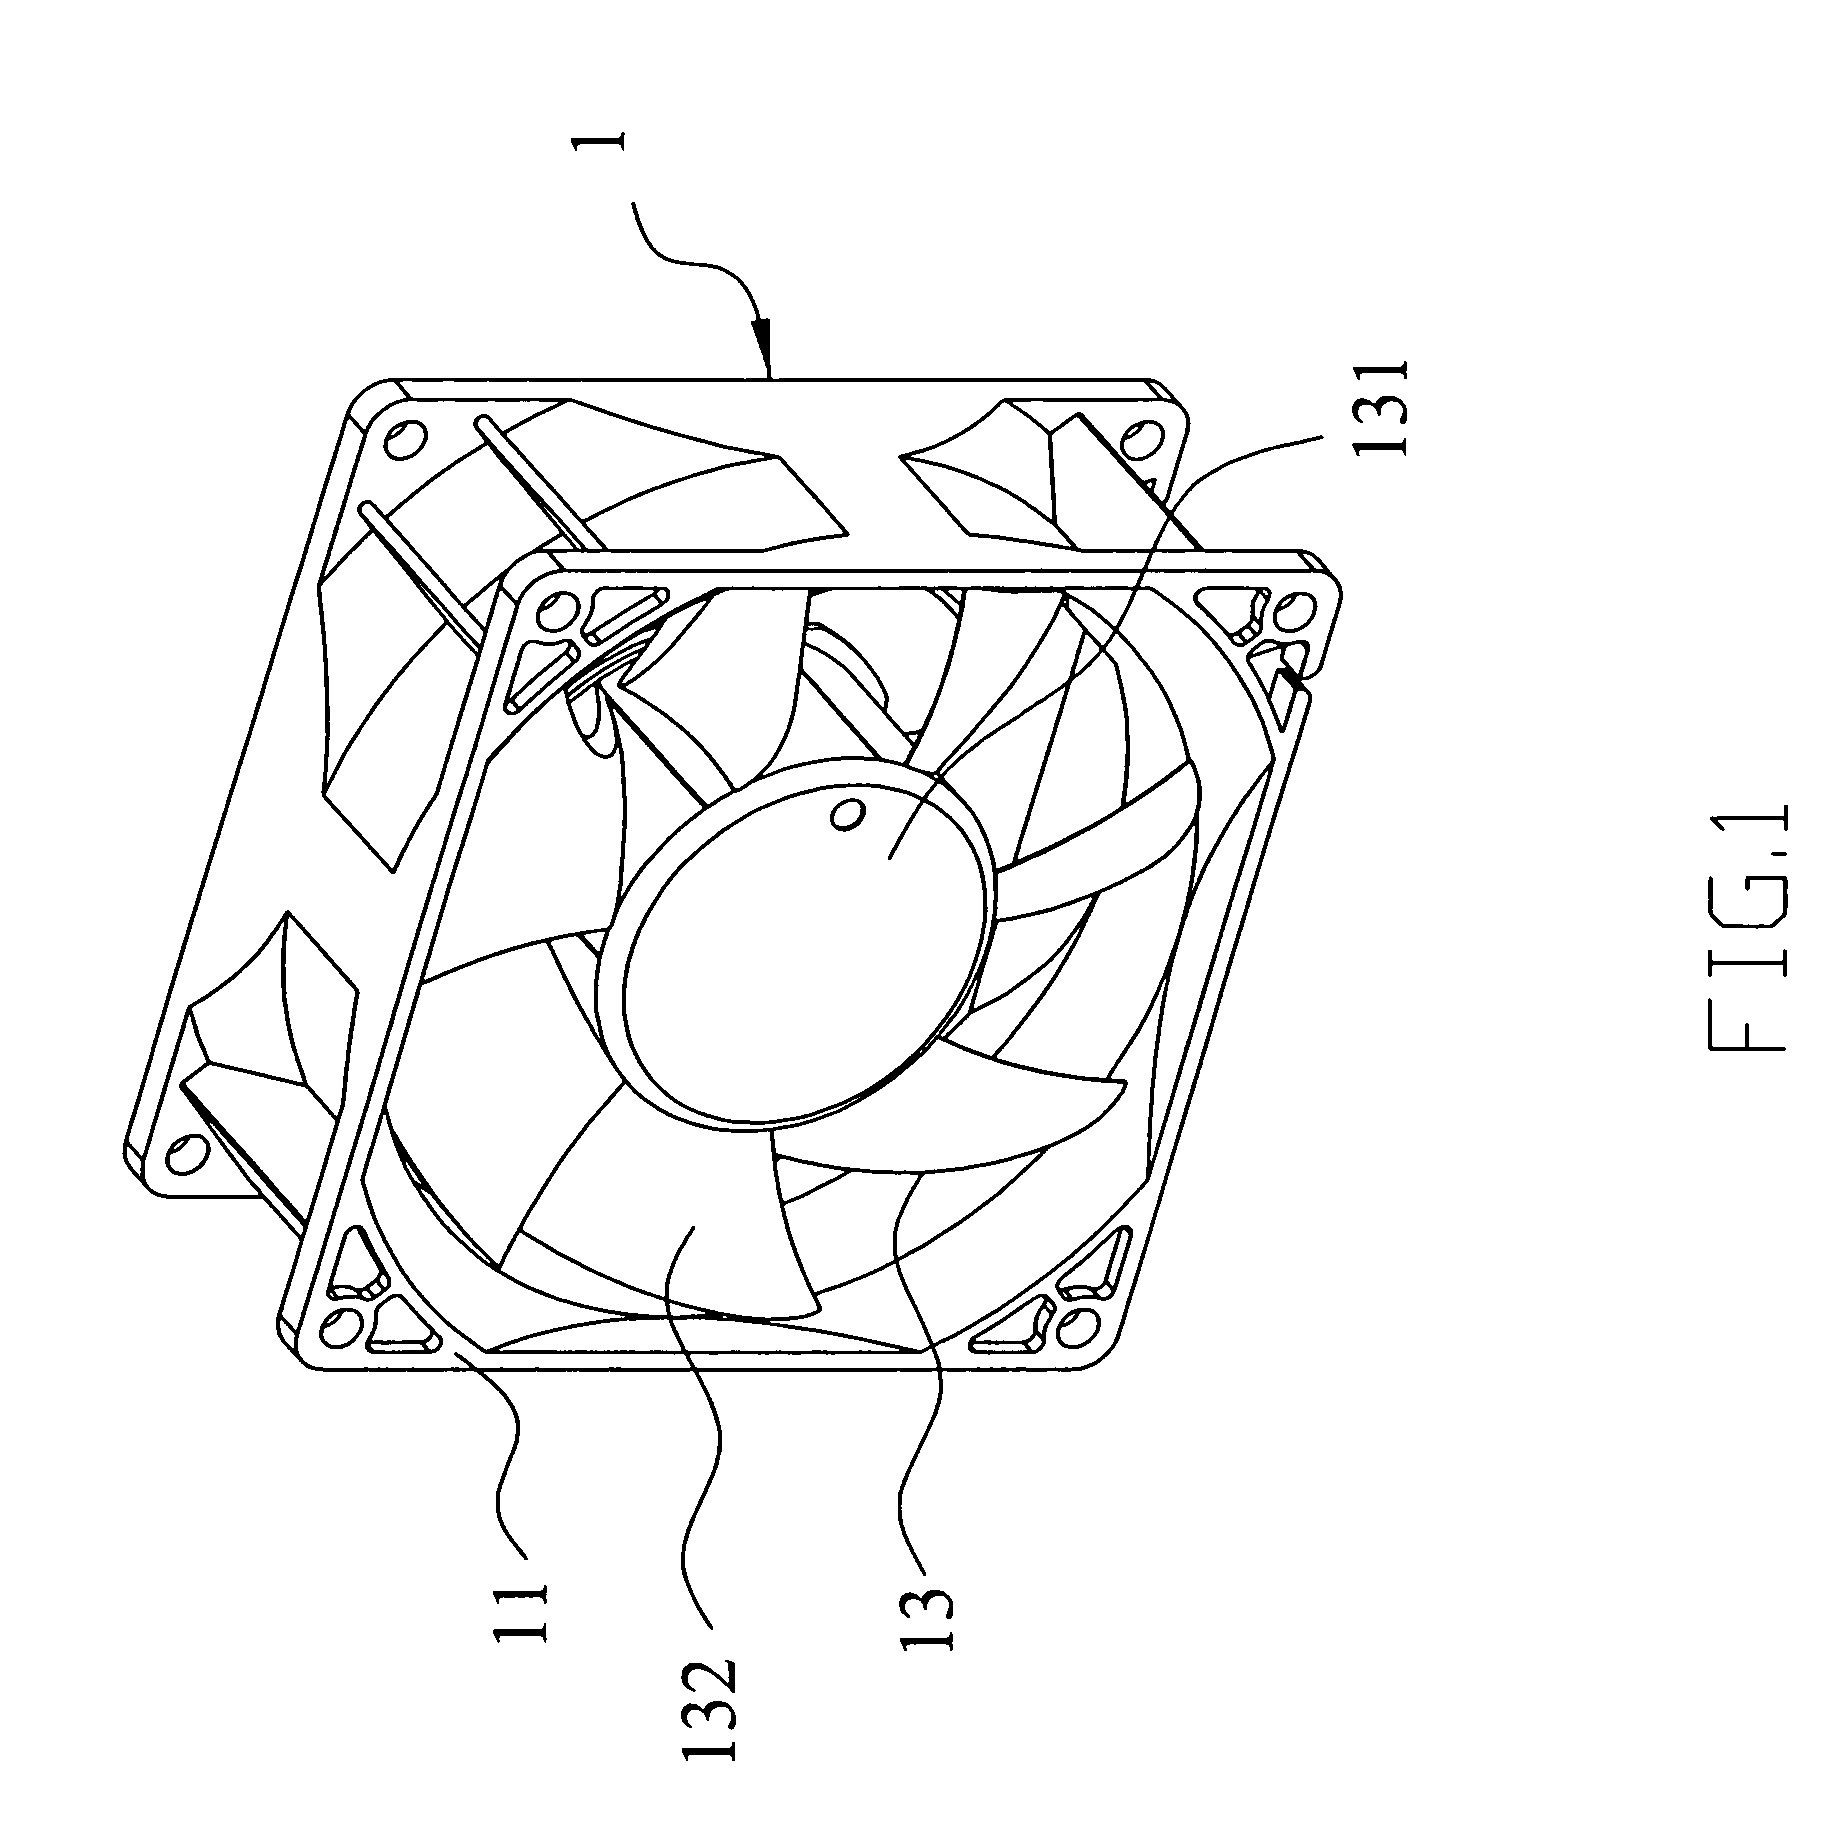 Printed circuit board having cooling means incorporated therein